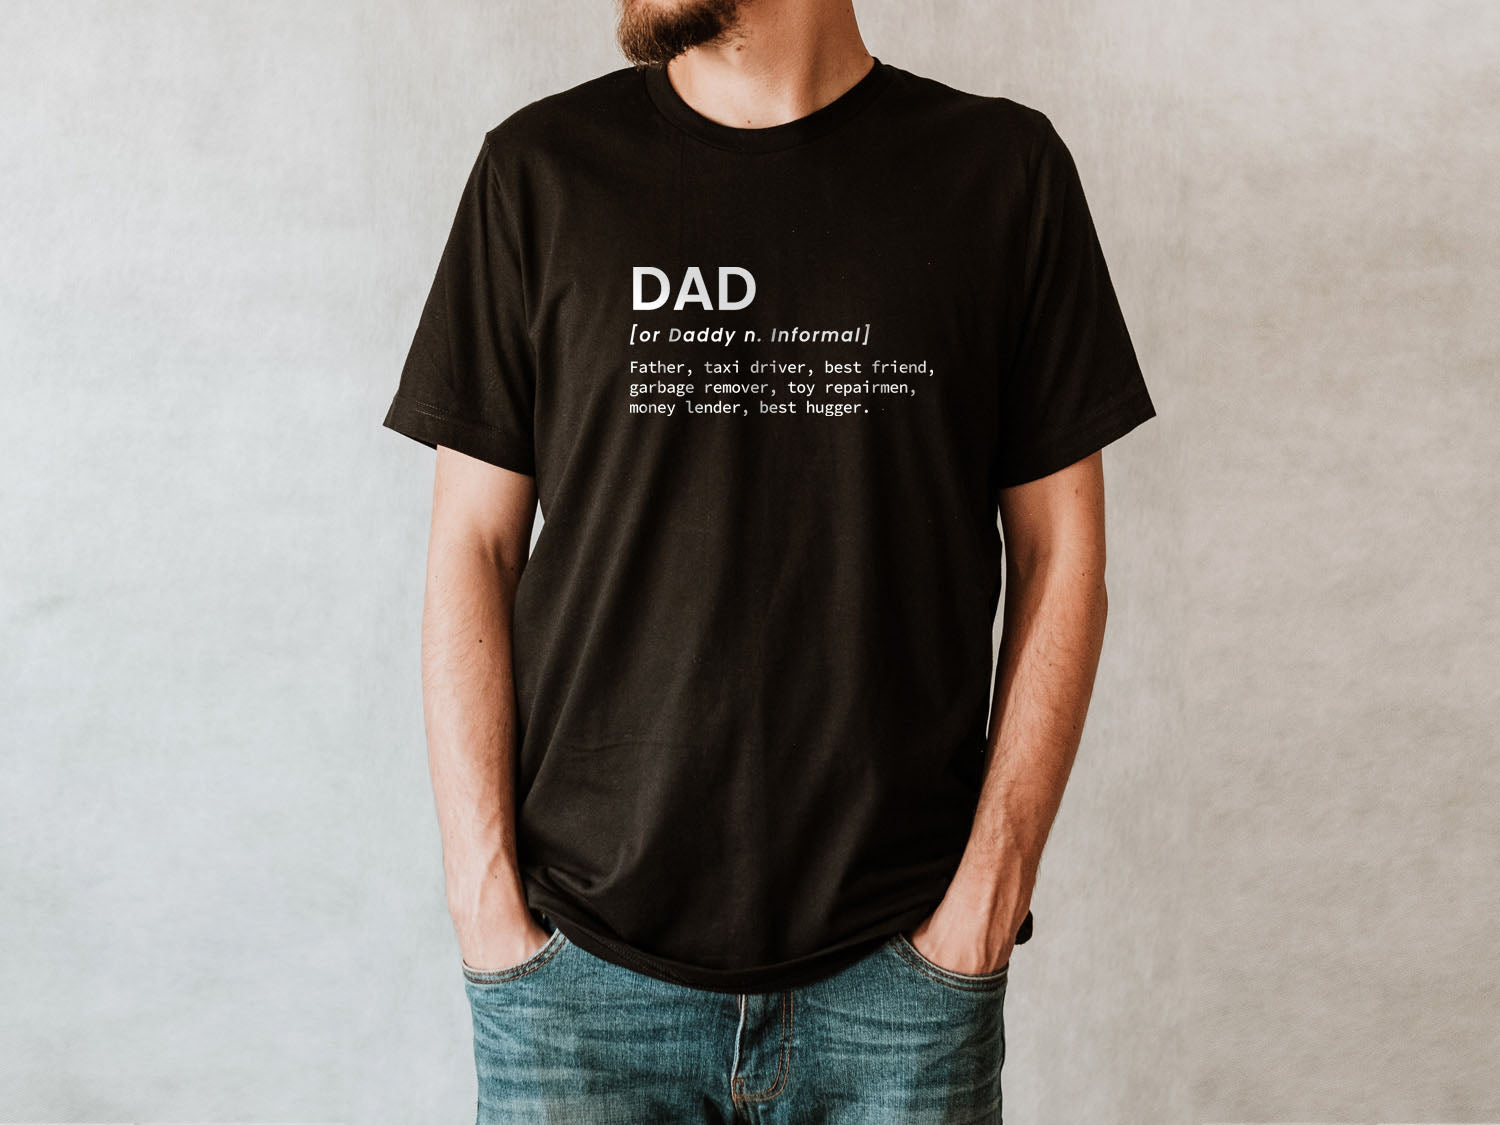 Funny Definition of Dad T-shirt - Funny Family Retro Vintage Design Printed Tee Shirt